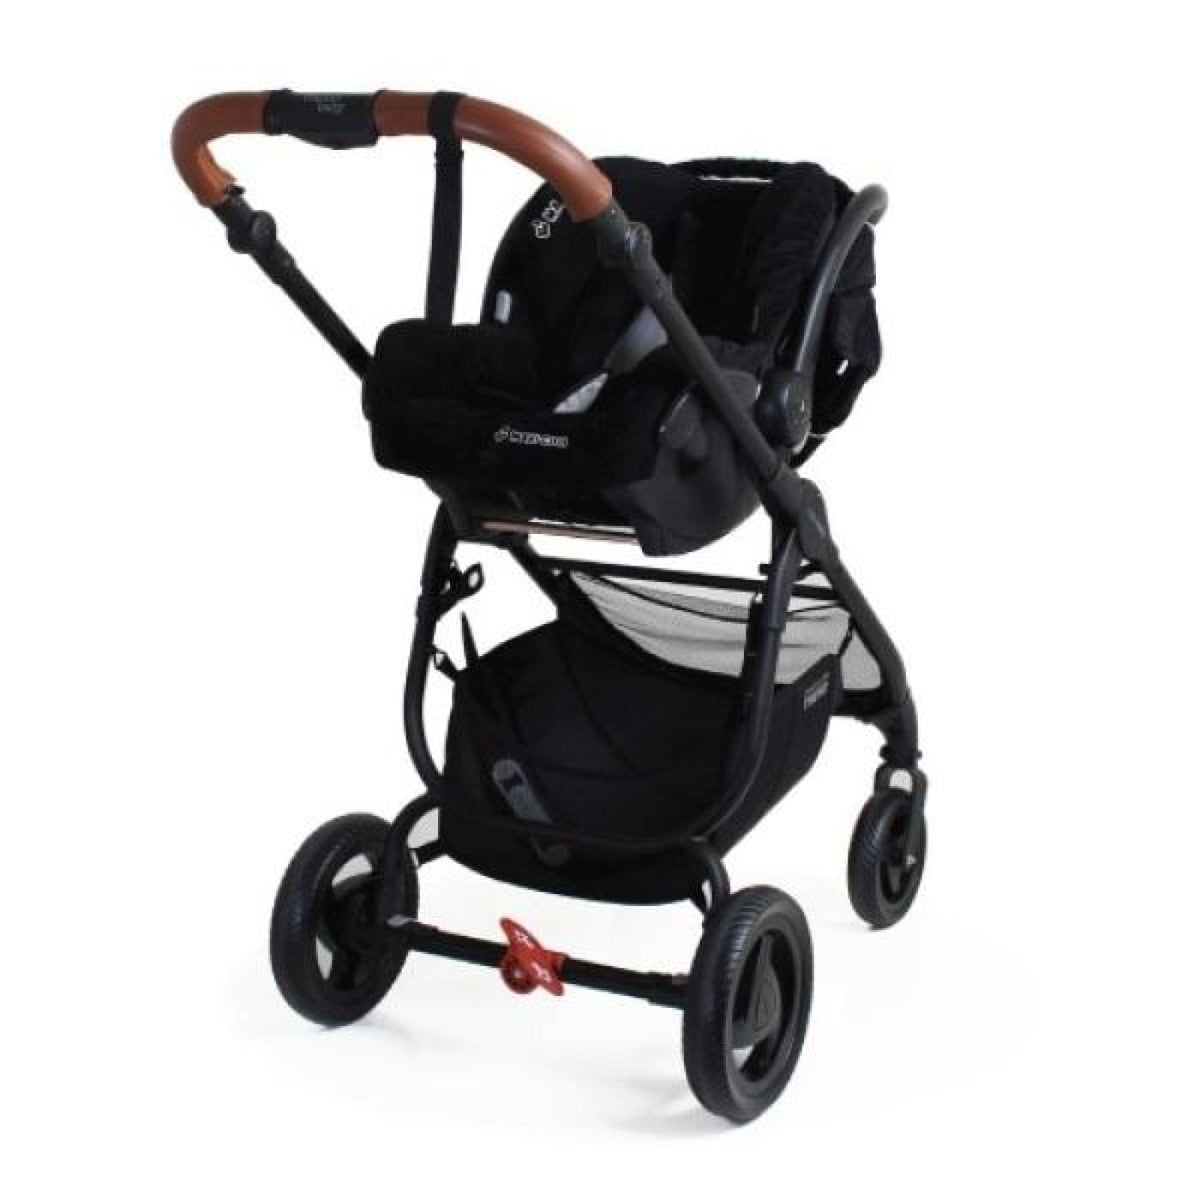 Valco Baby Maxi Cosi Adaptor for Ultra Trend - PRAMS &amp; STROLLERS - ADAPTORS FOR TRAV SYS